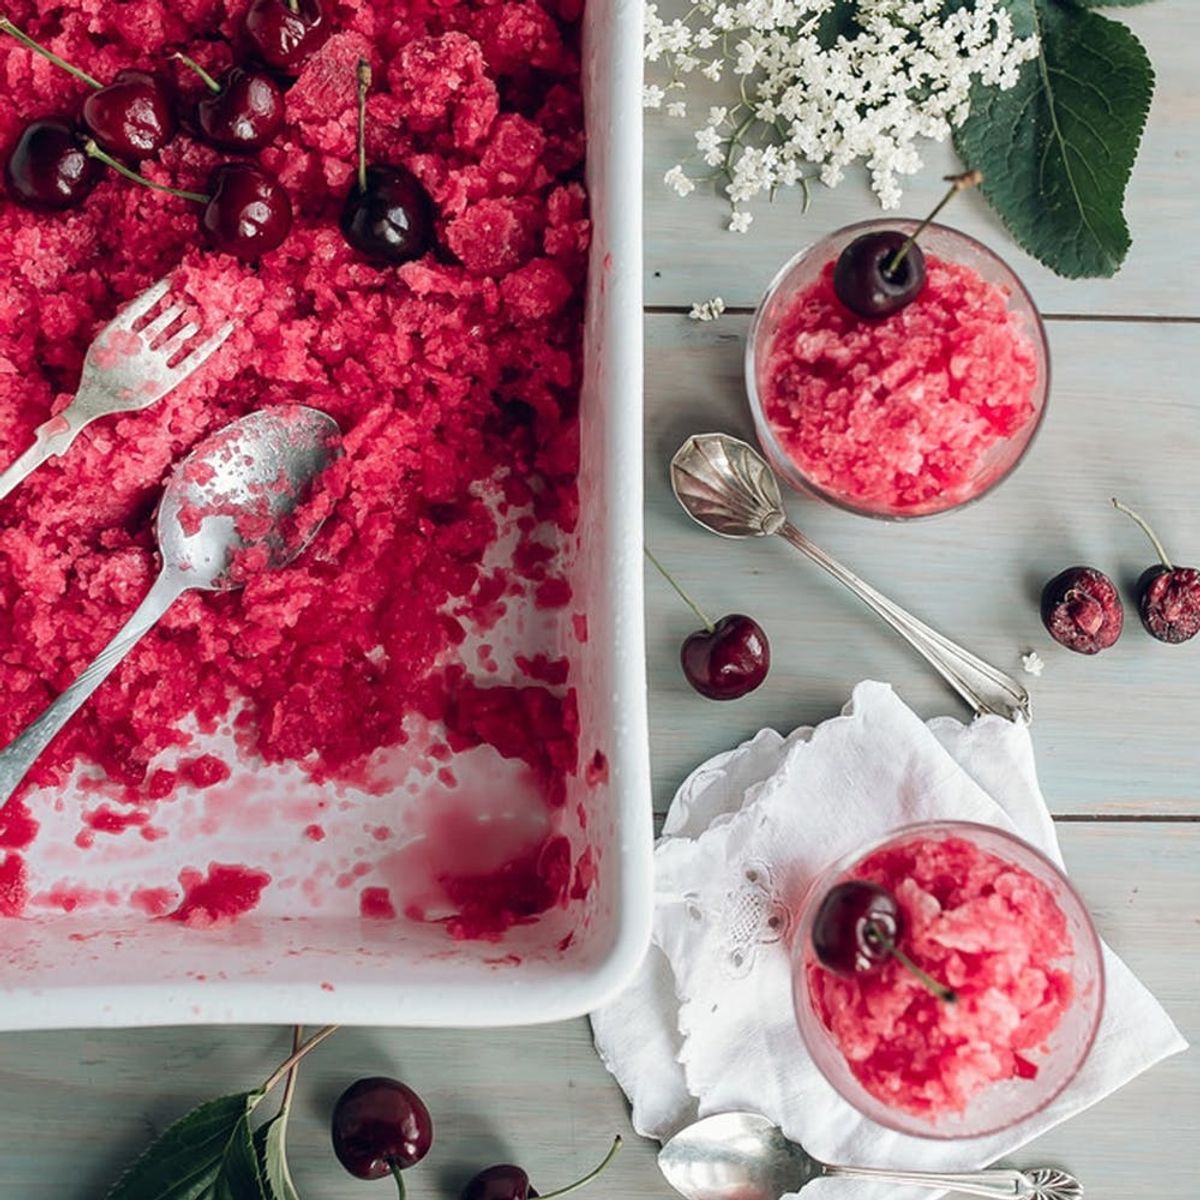 14 Fruity Granitas That Are Sure to Help You Keep Cool This Summer